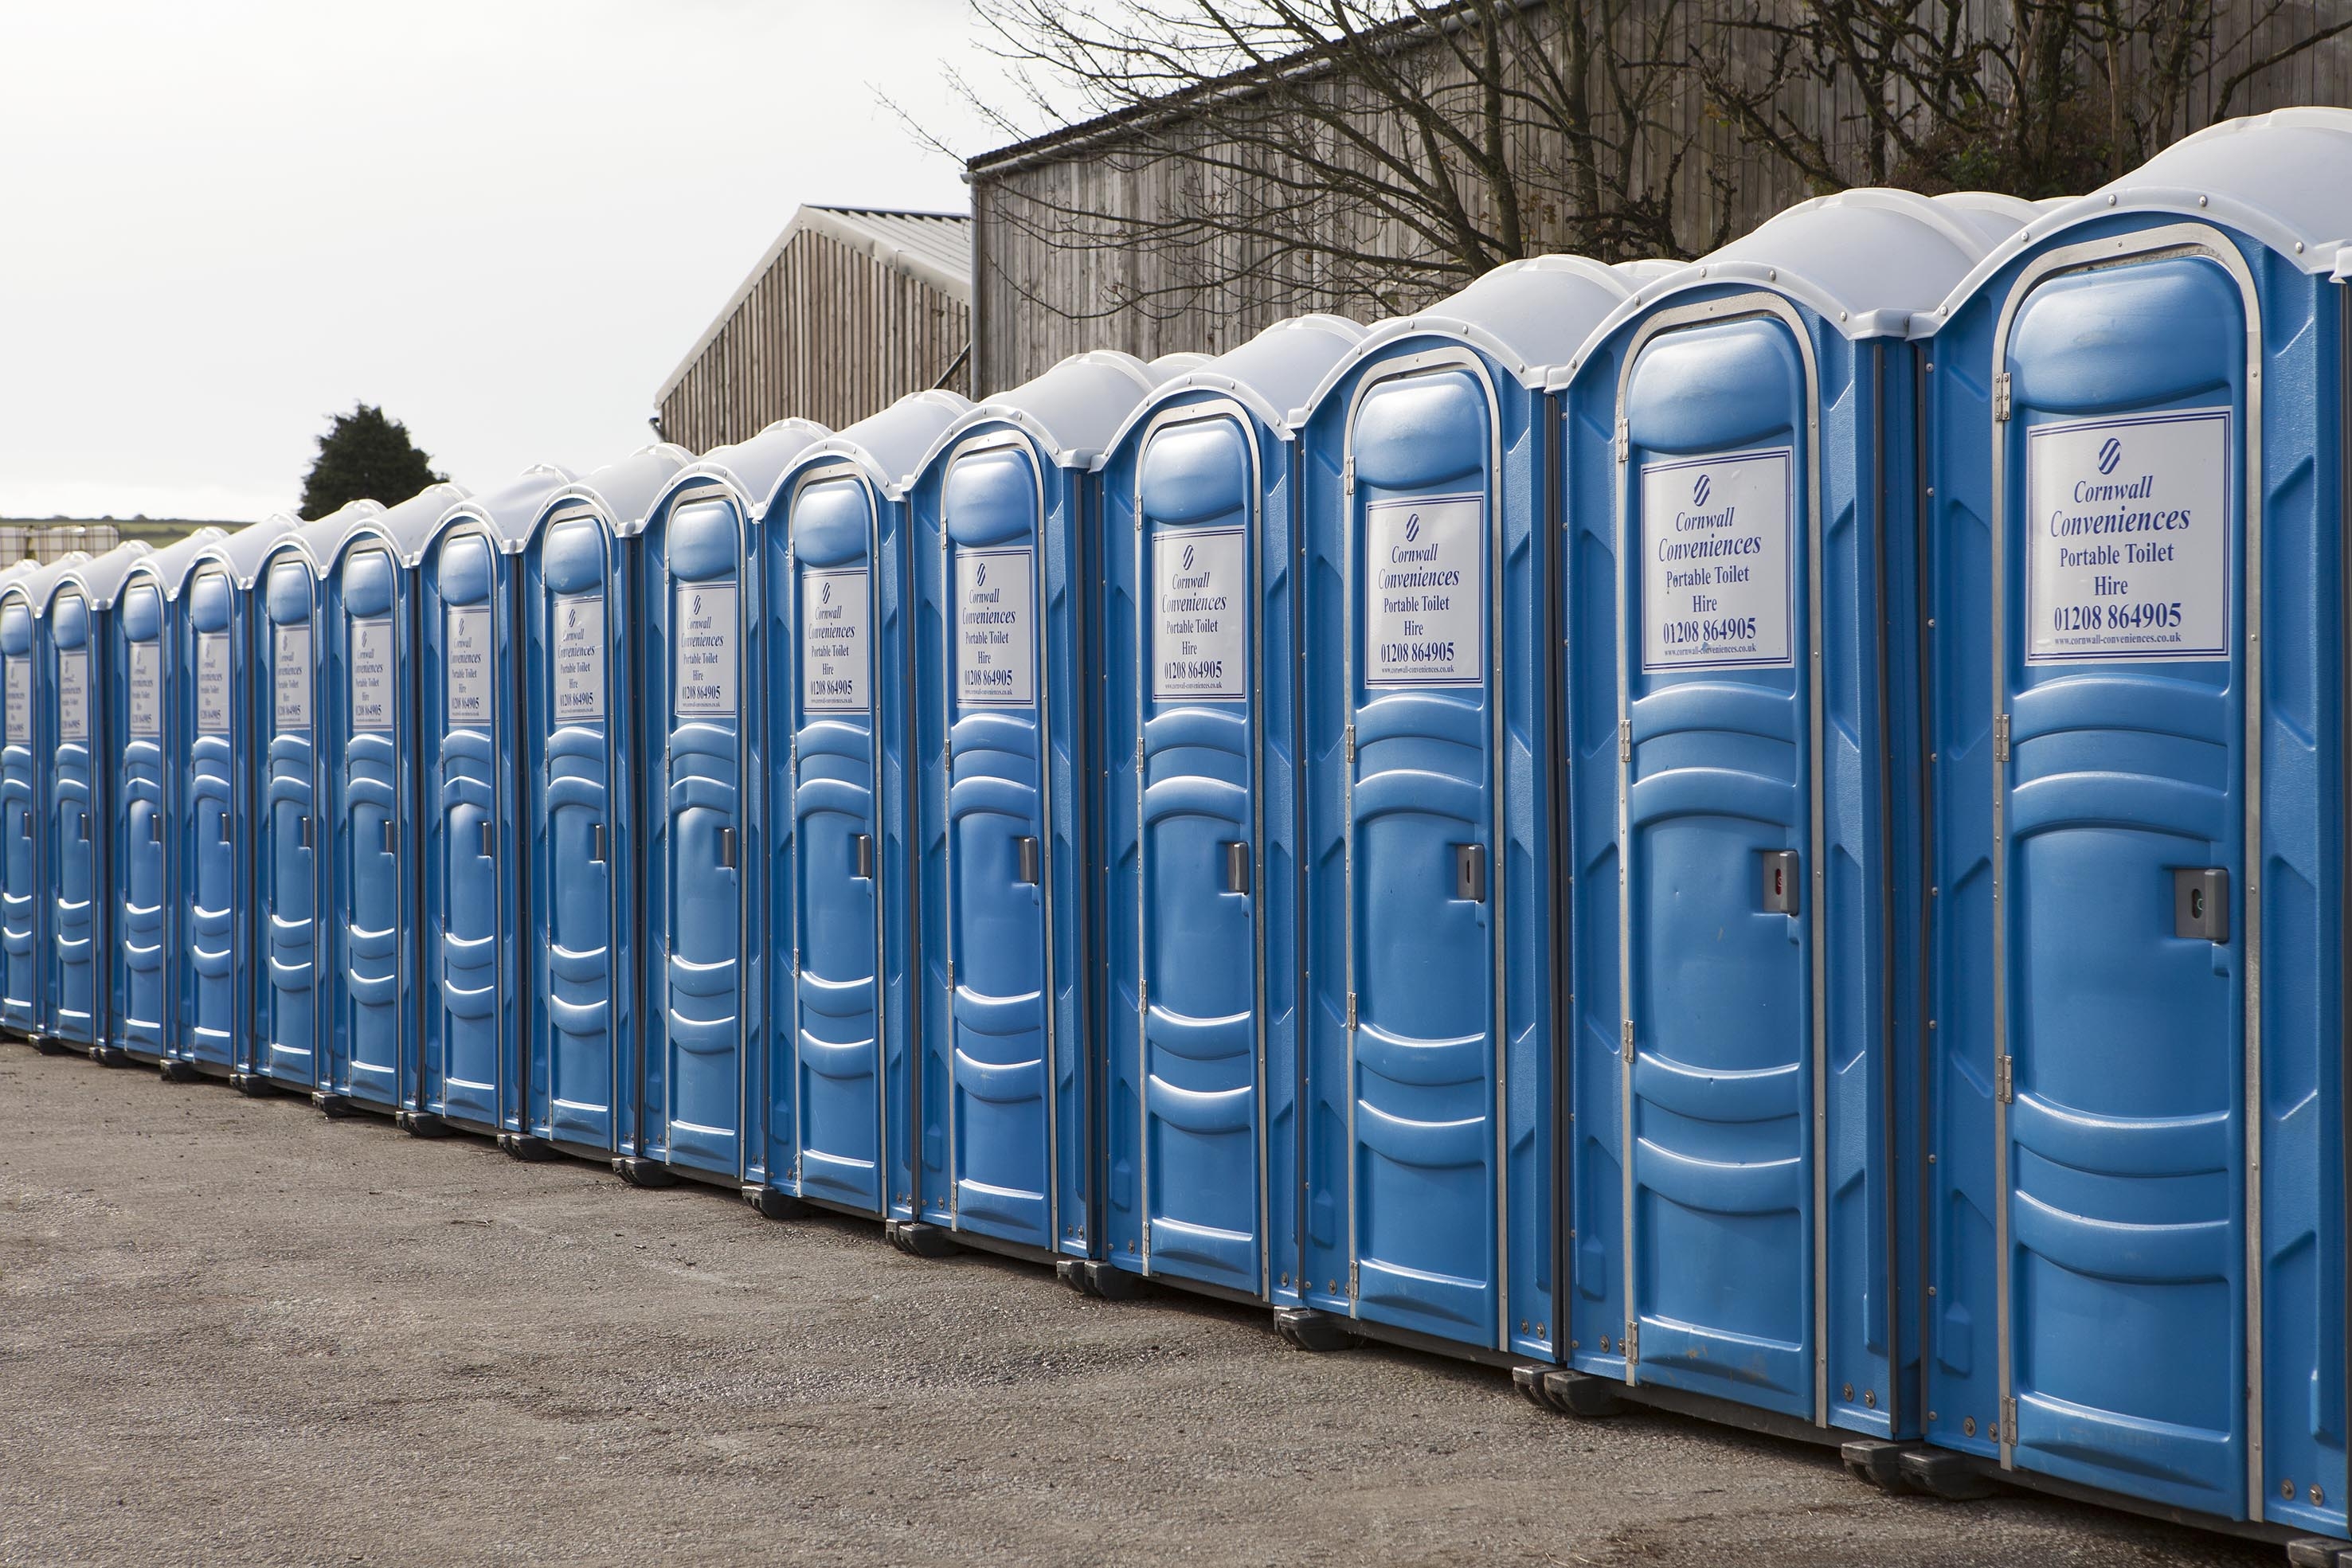 Toilet Hire in Cornwall